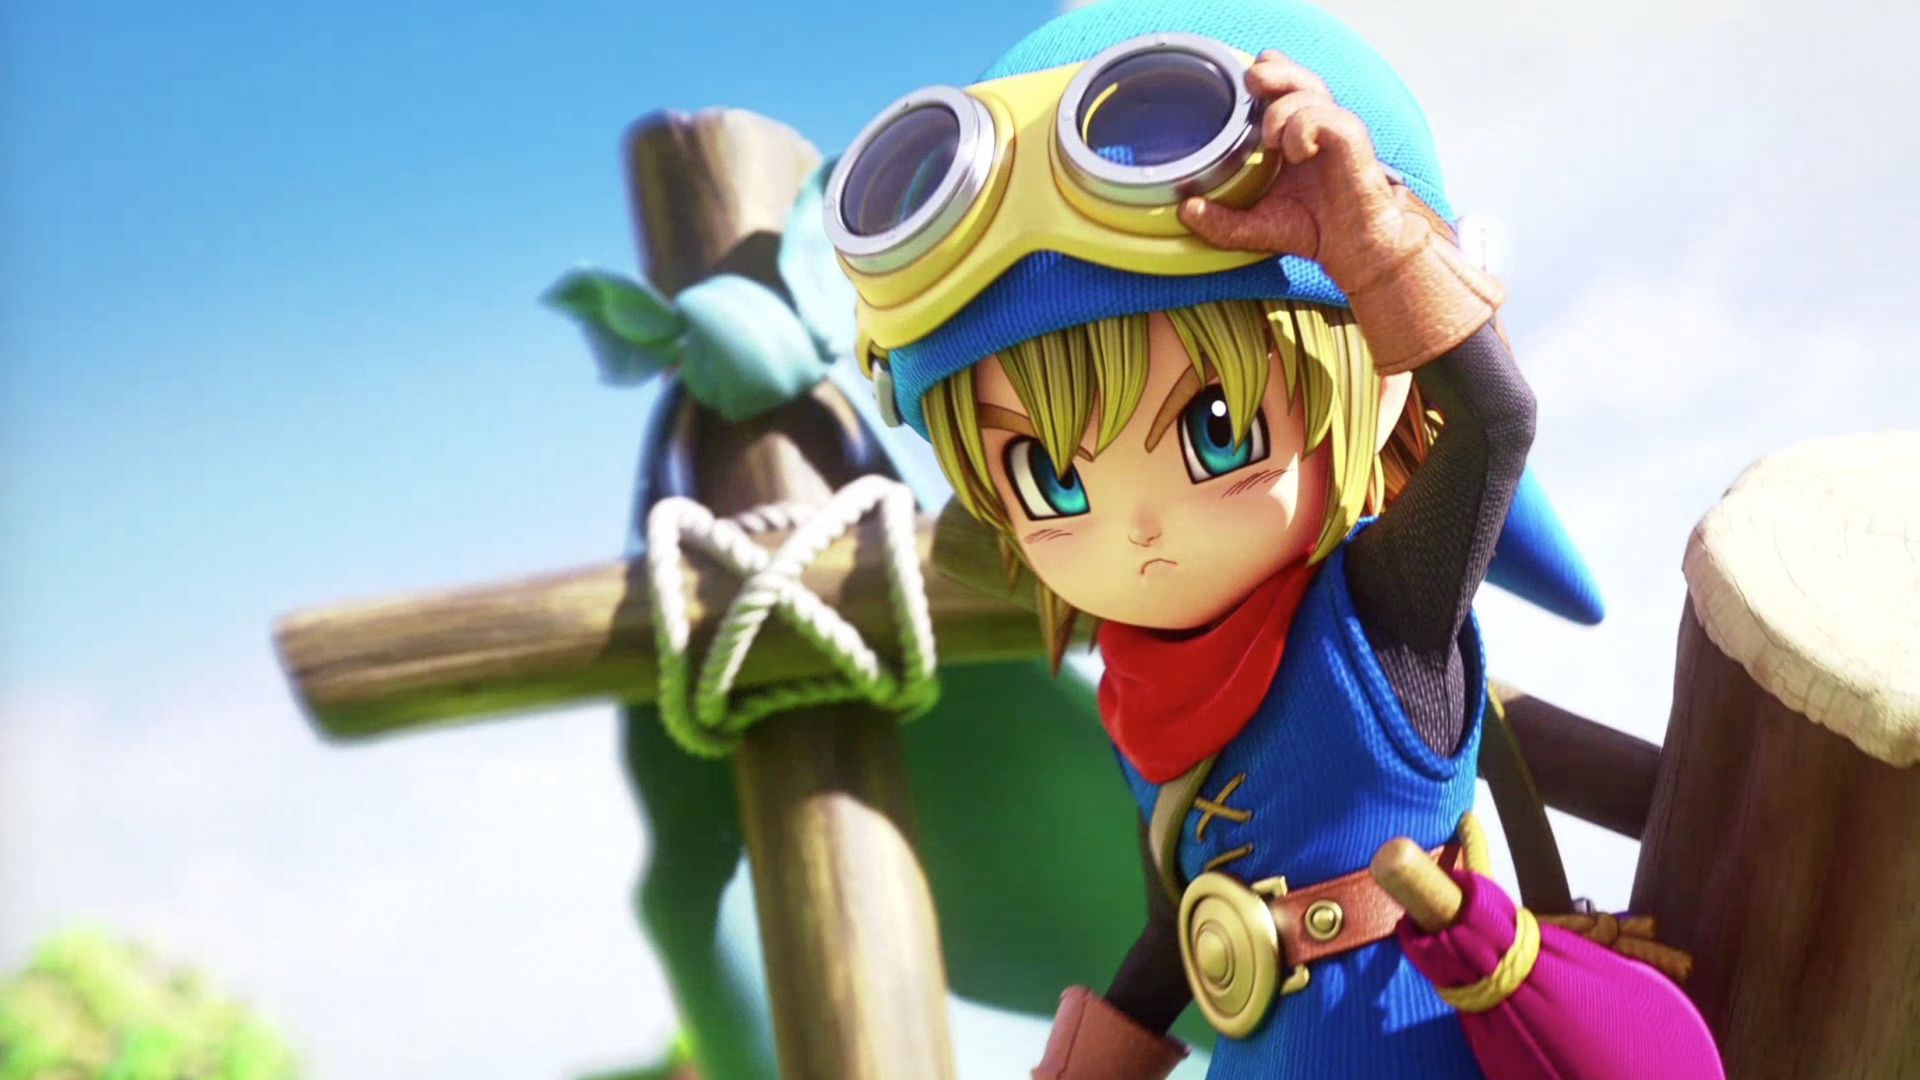 Wallpaper Dragon Quest Builders, video game, angry Hero